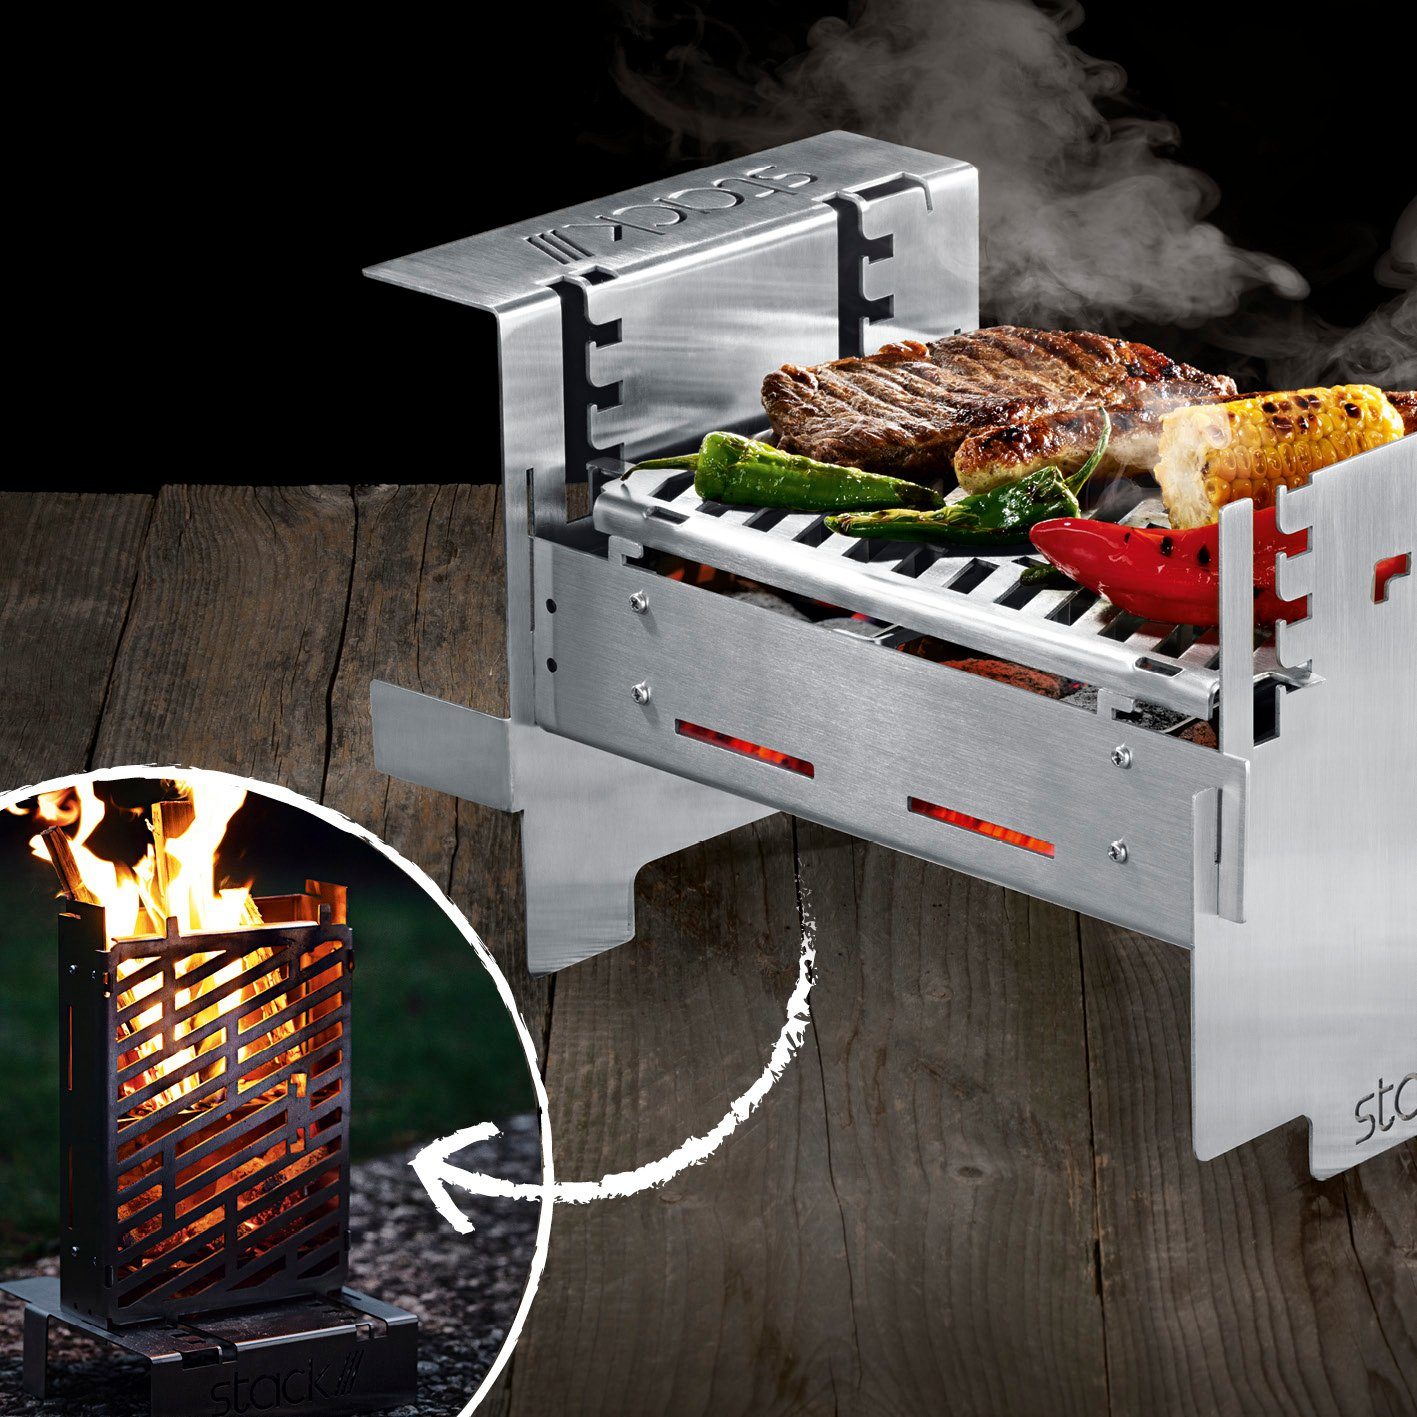 2 cm Feuerstelle stack Stack Holzkohlegrill 21 Feuerkorb 1 und grill, x 27 n' in Grillfläche stack///grill Grill Trangia